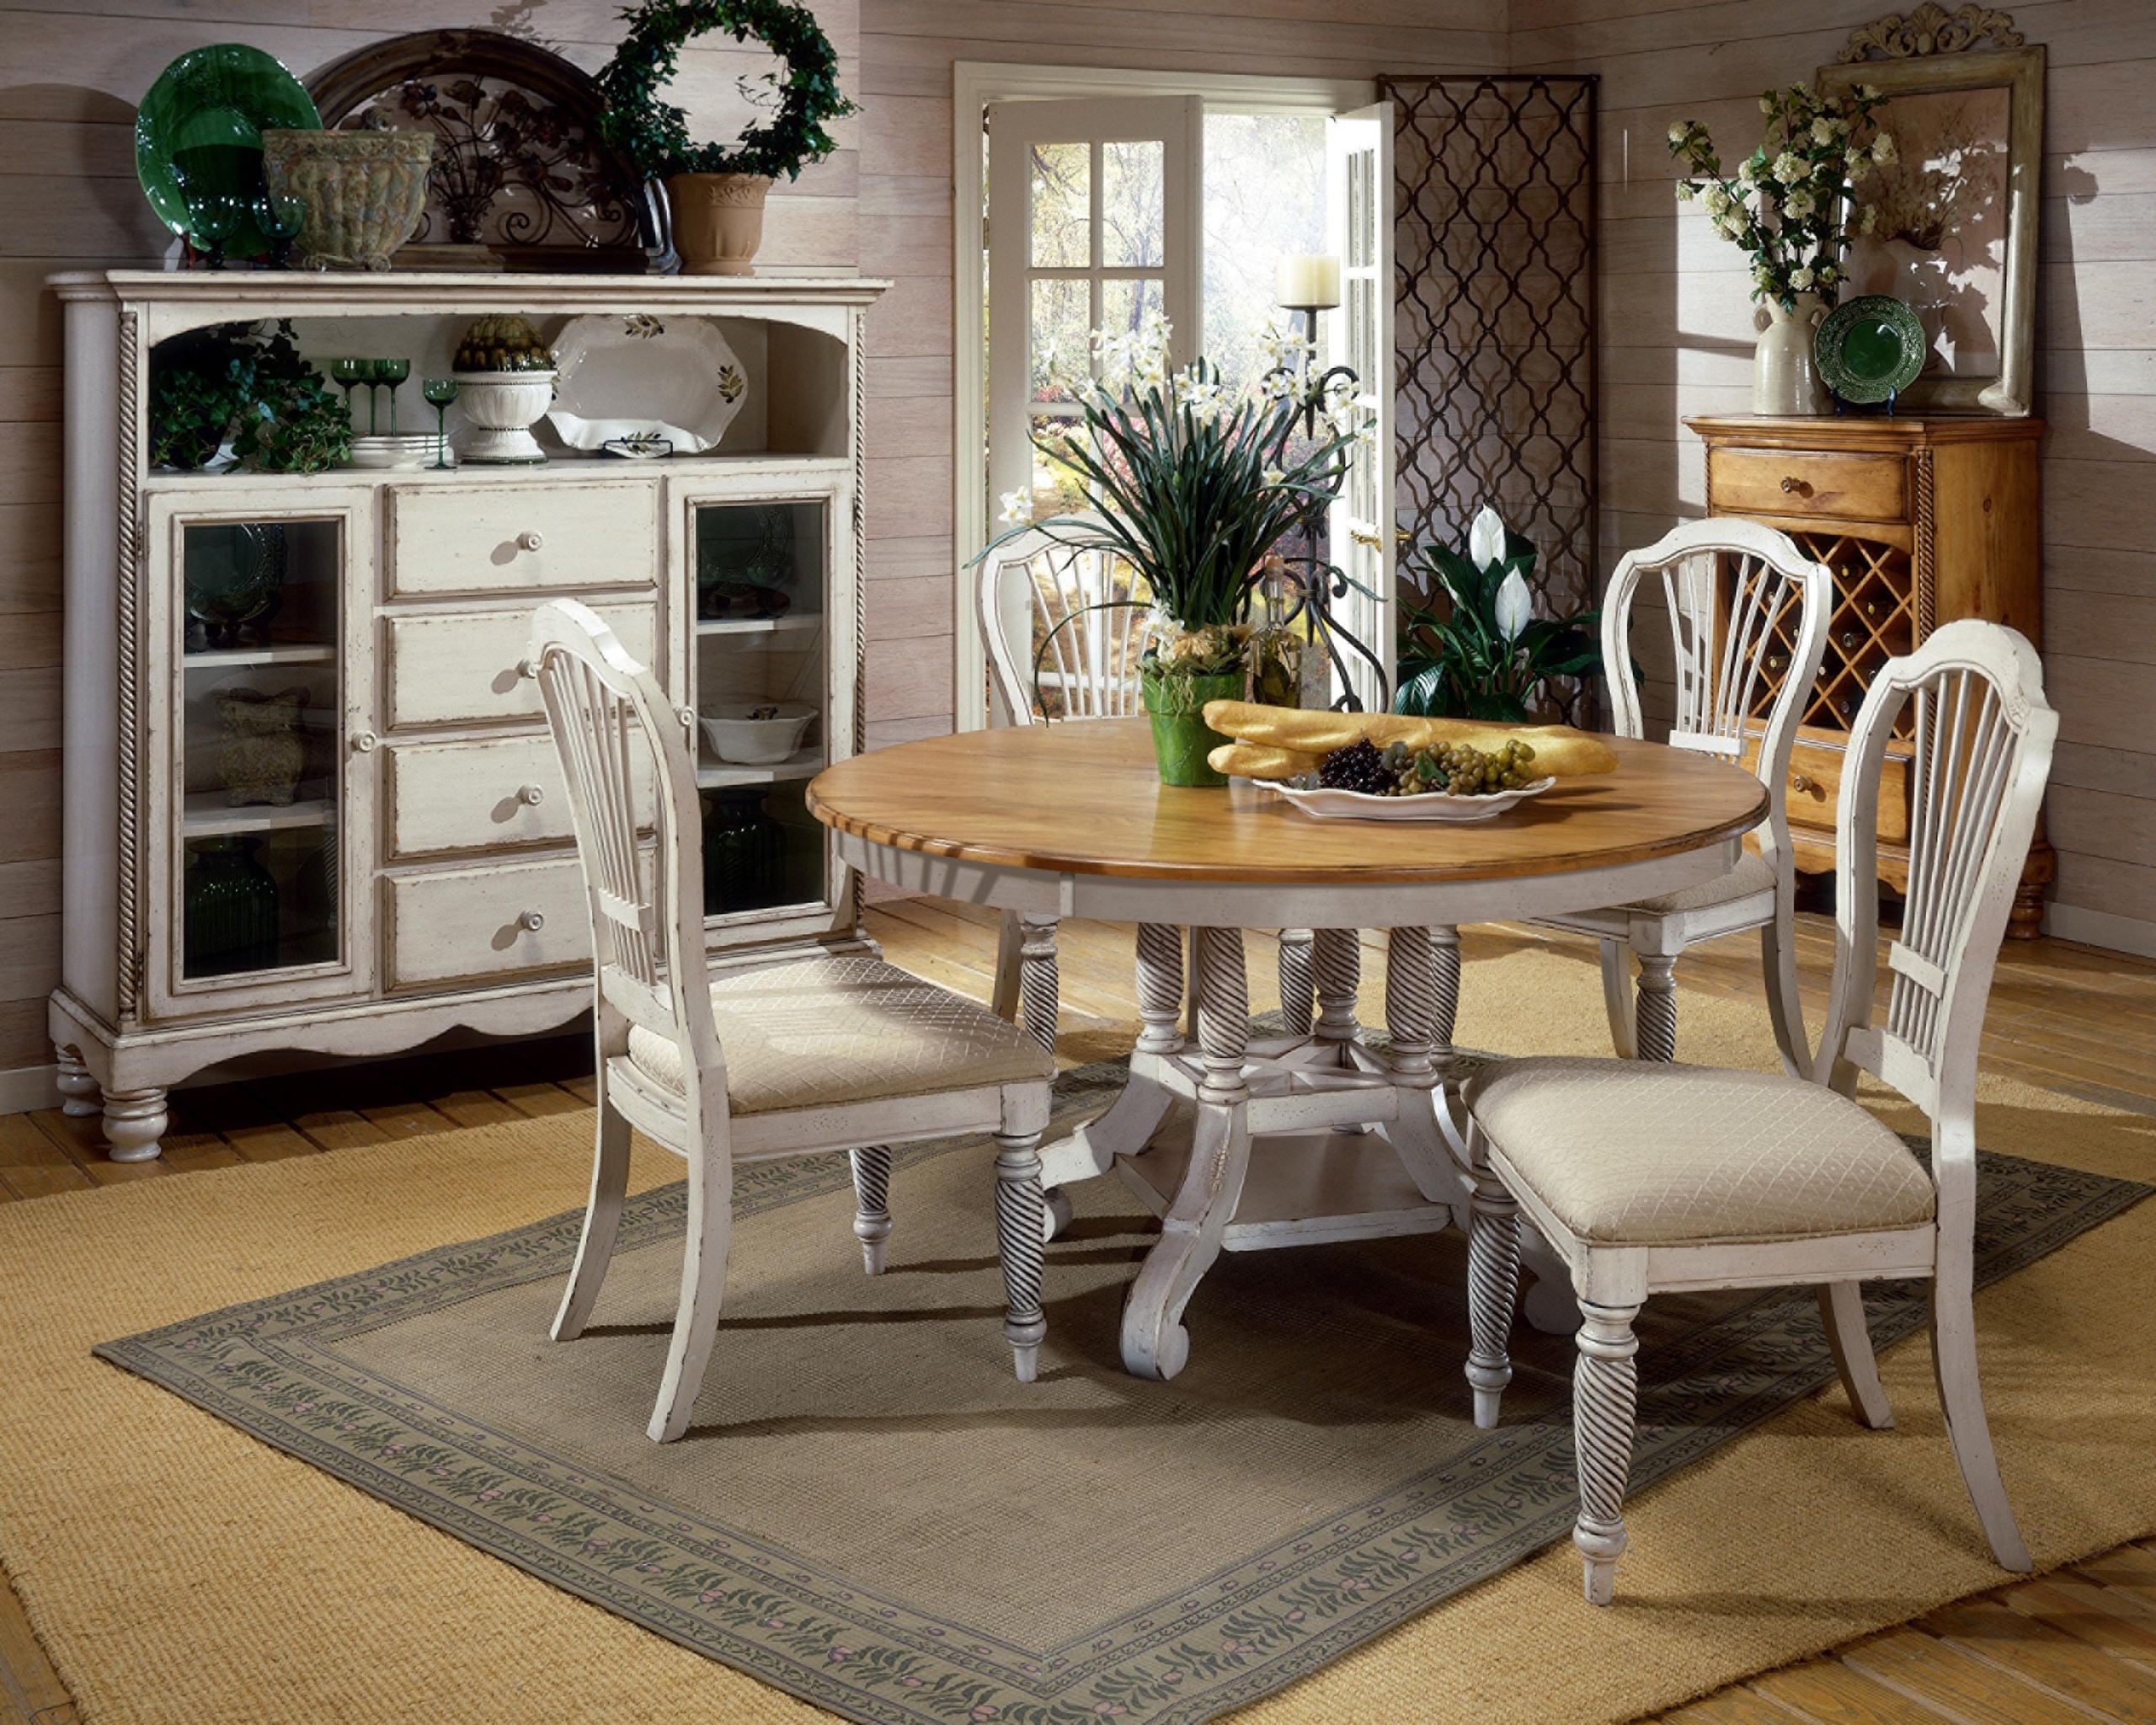 French Country Dining Table Visualhunt, French Country Dining Room Sets